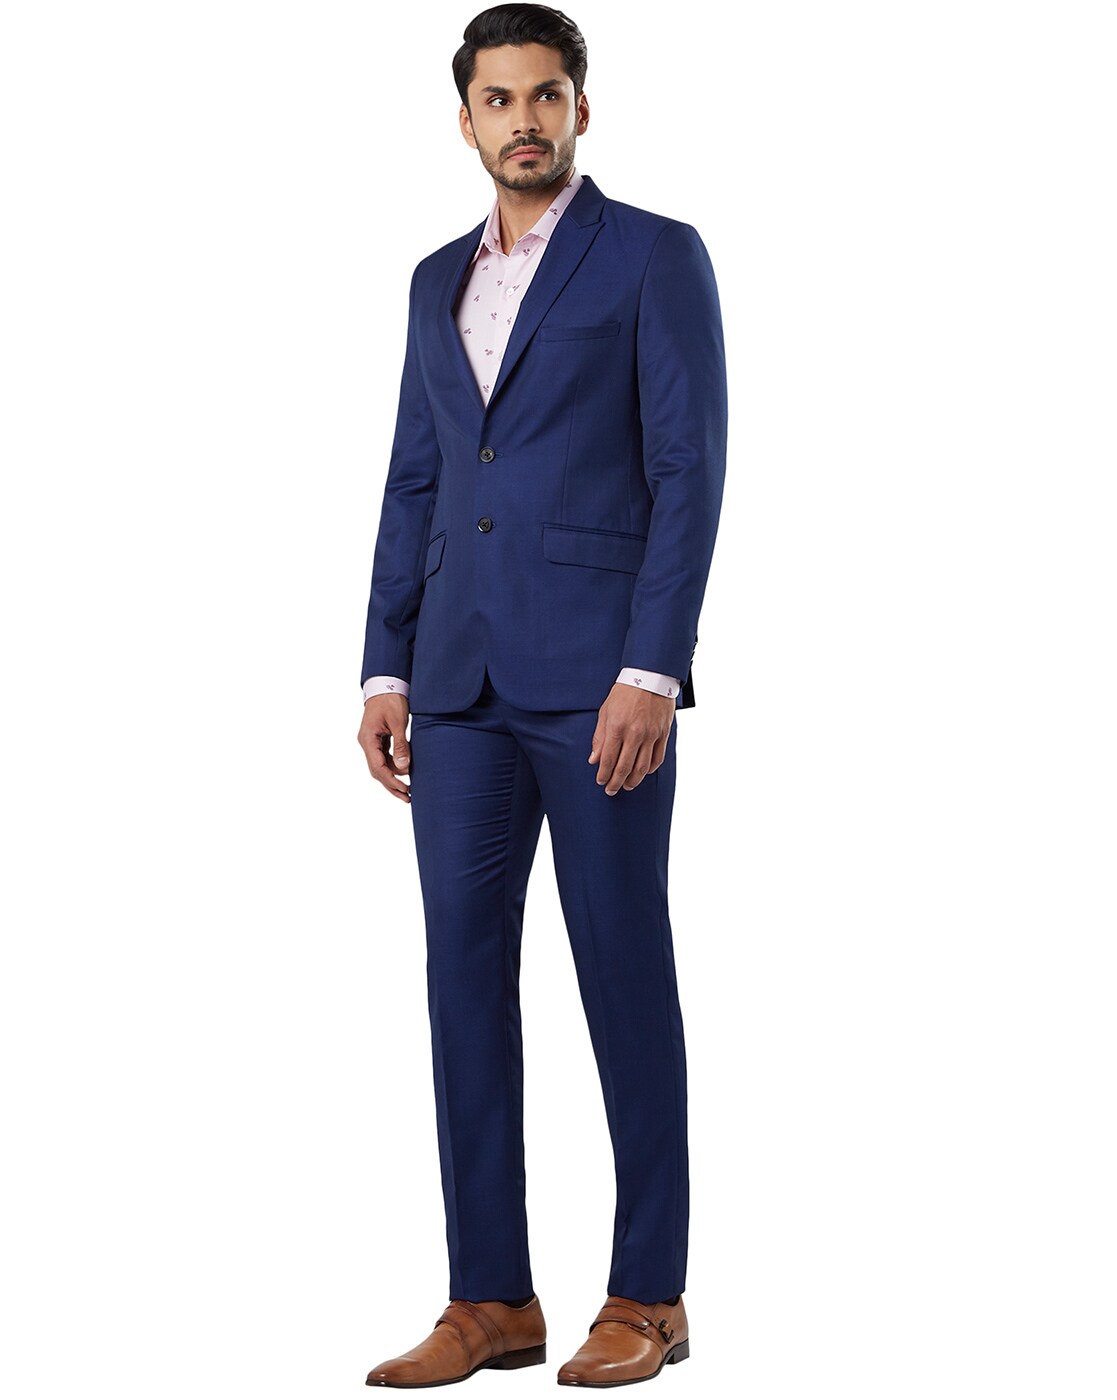 Buy Blue Suit Sets for Men by RAYMOND Online | Ajio.com